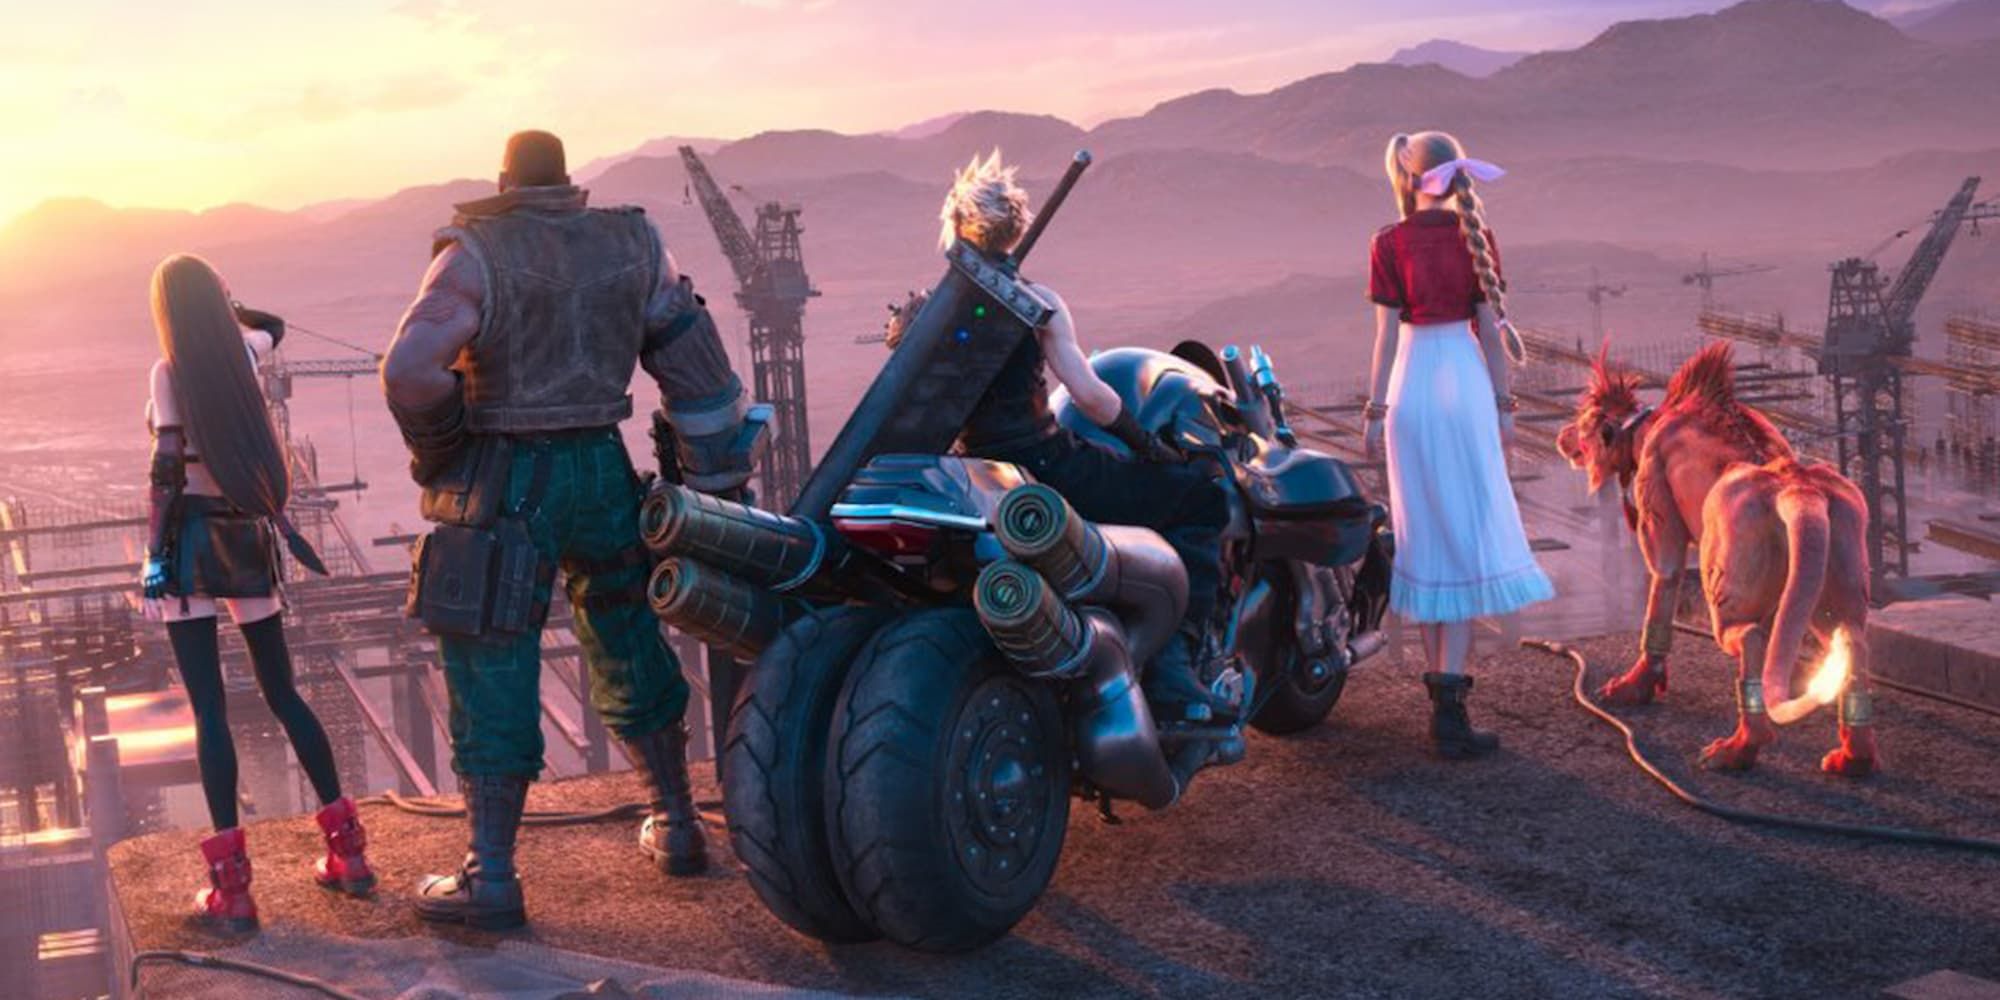 The group of characters in Final Fantasy 7 Remake Intergrade stand near a cliff's edge, overlooking a construction zone, with Cloud on a motorcycle.